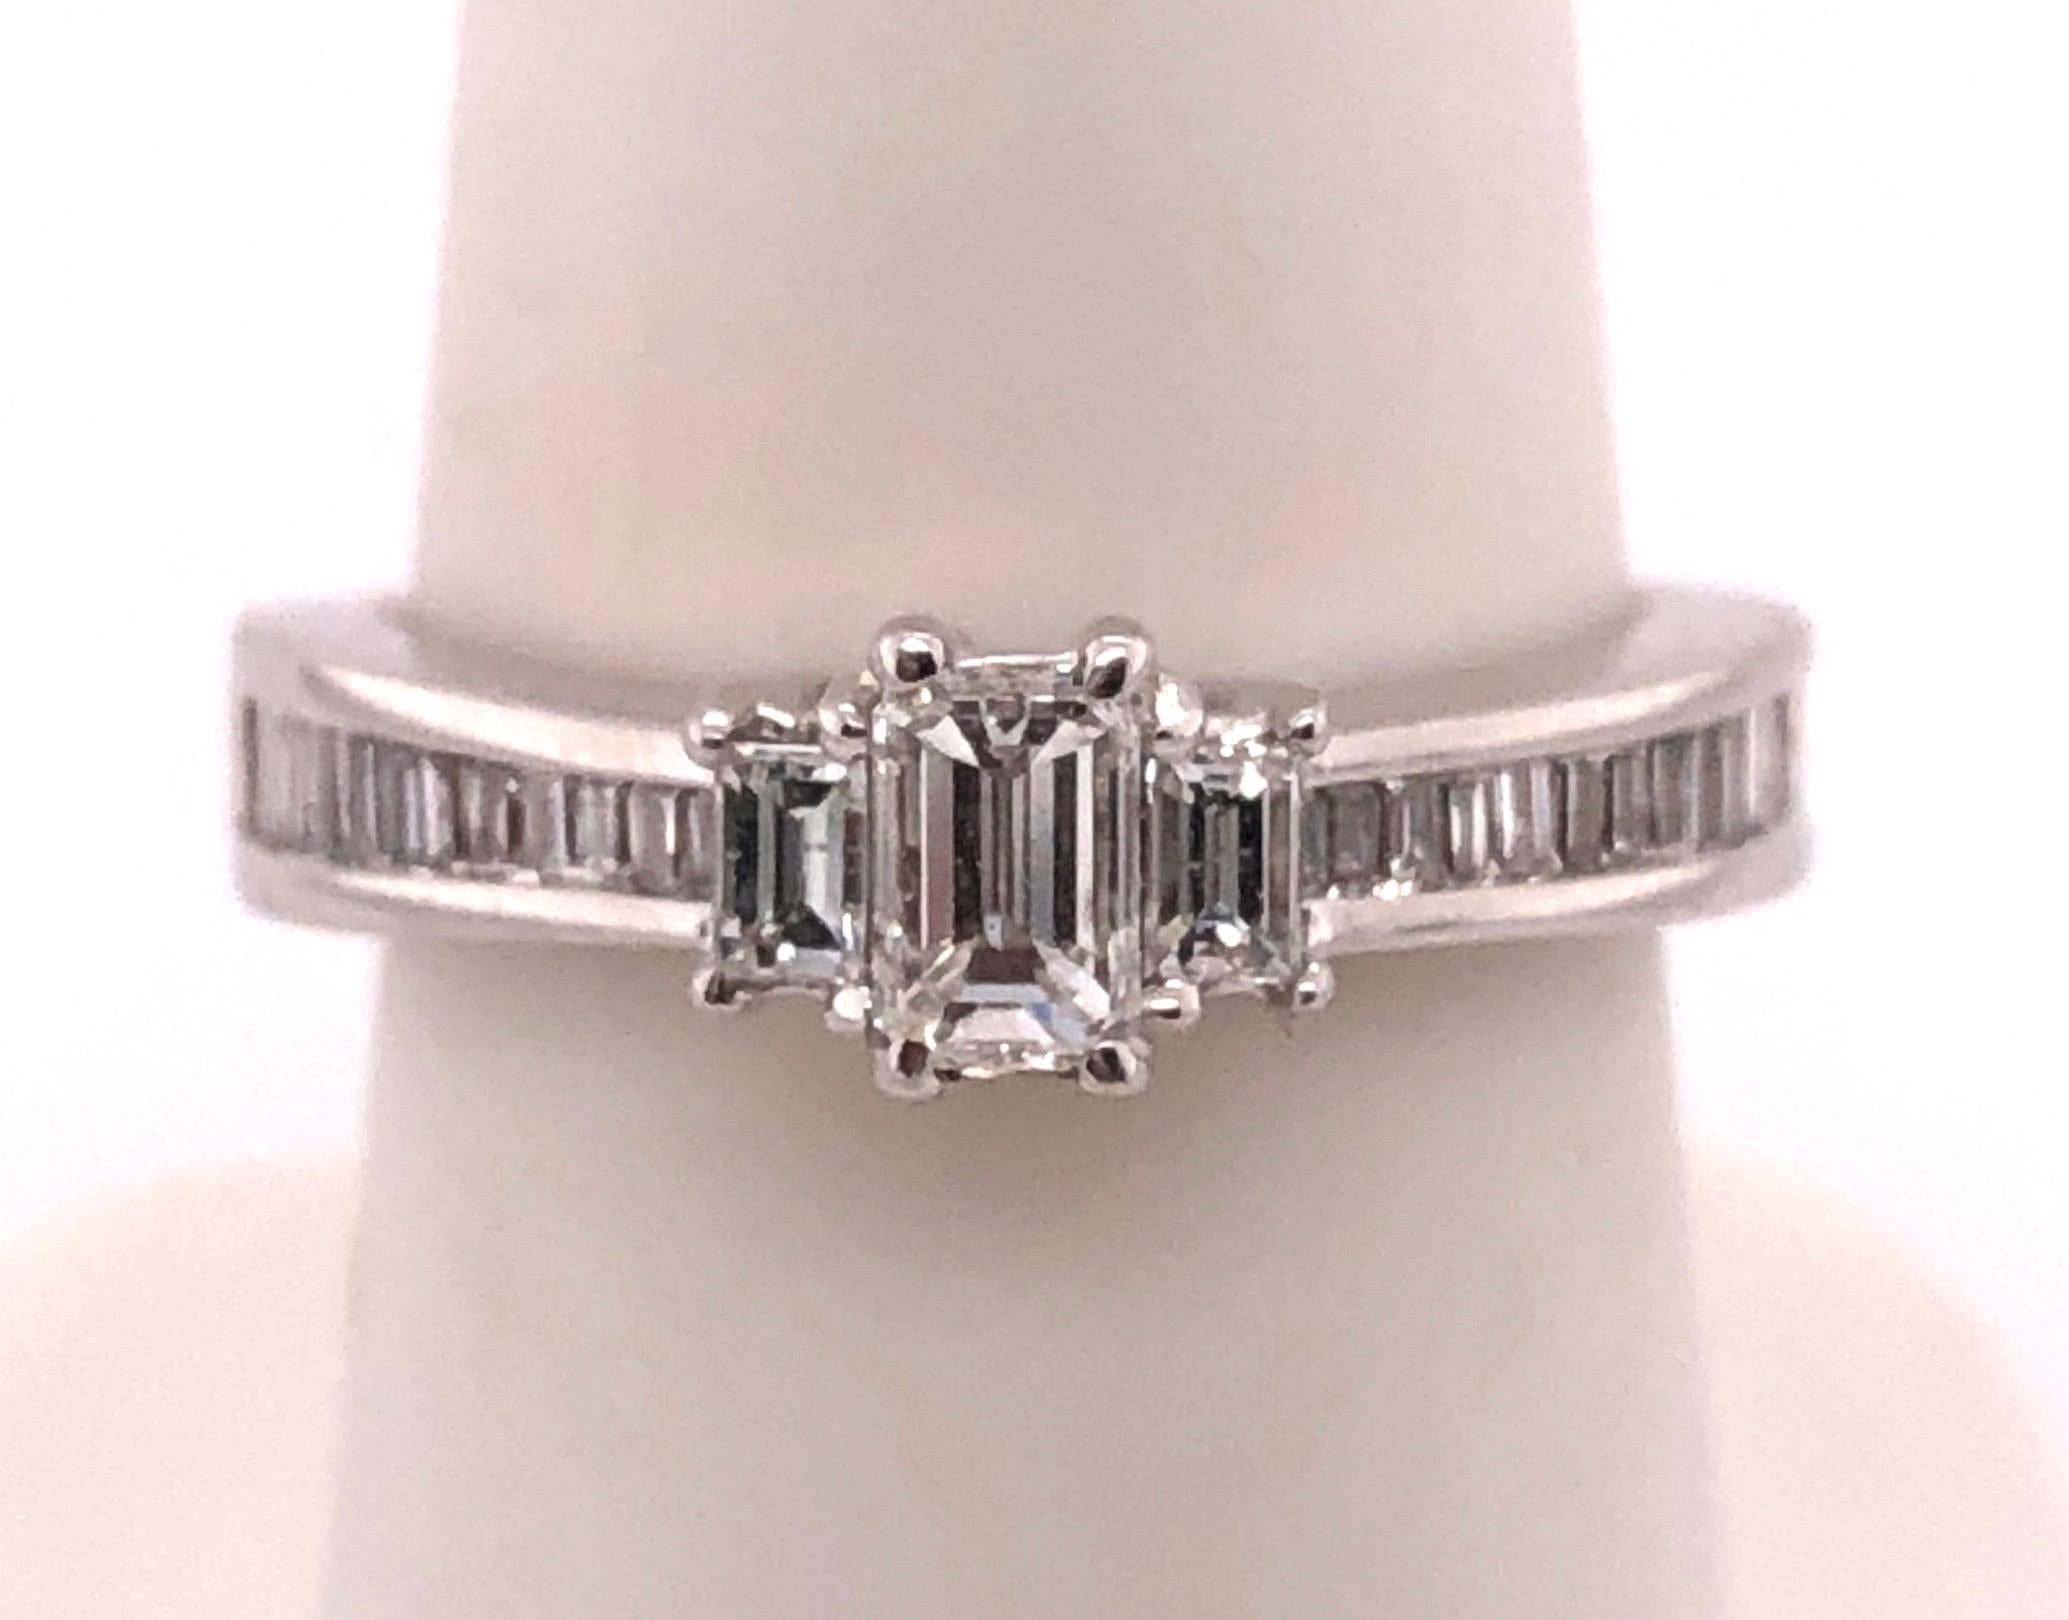 14Kt White Gold Engagement Ring 0.75 Total Diamond Weight.
Size 7 with 4 grams total weight.